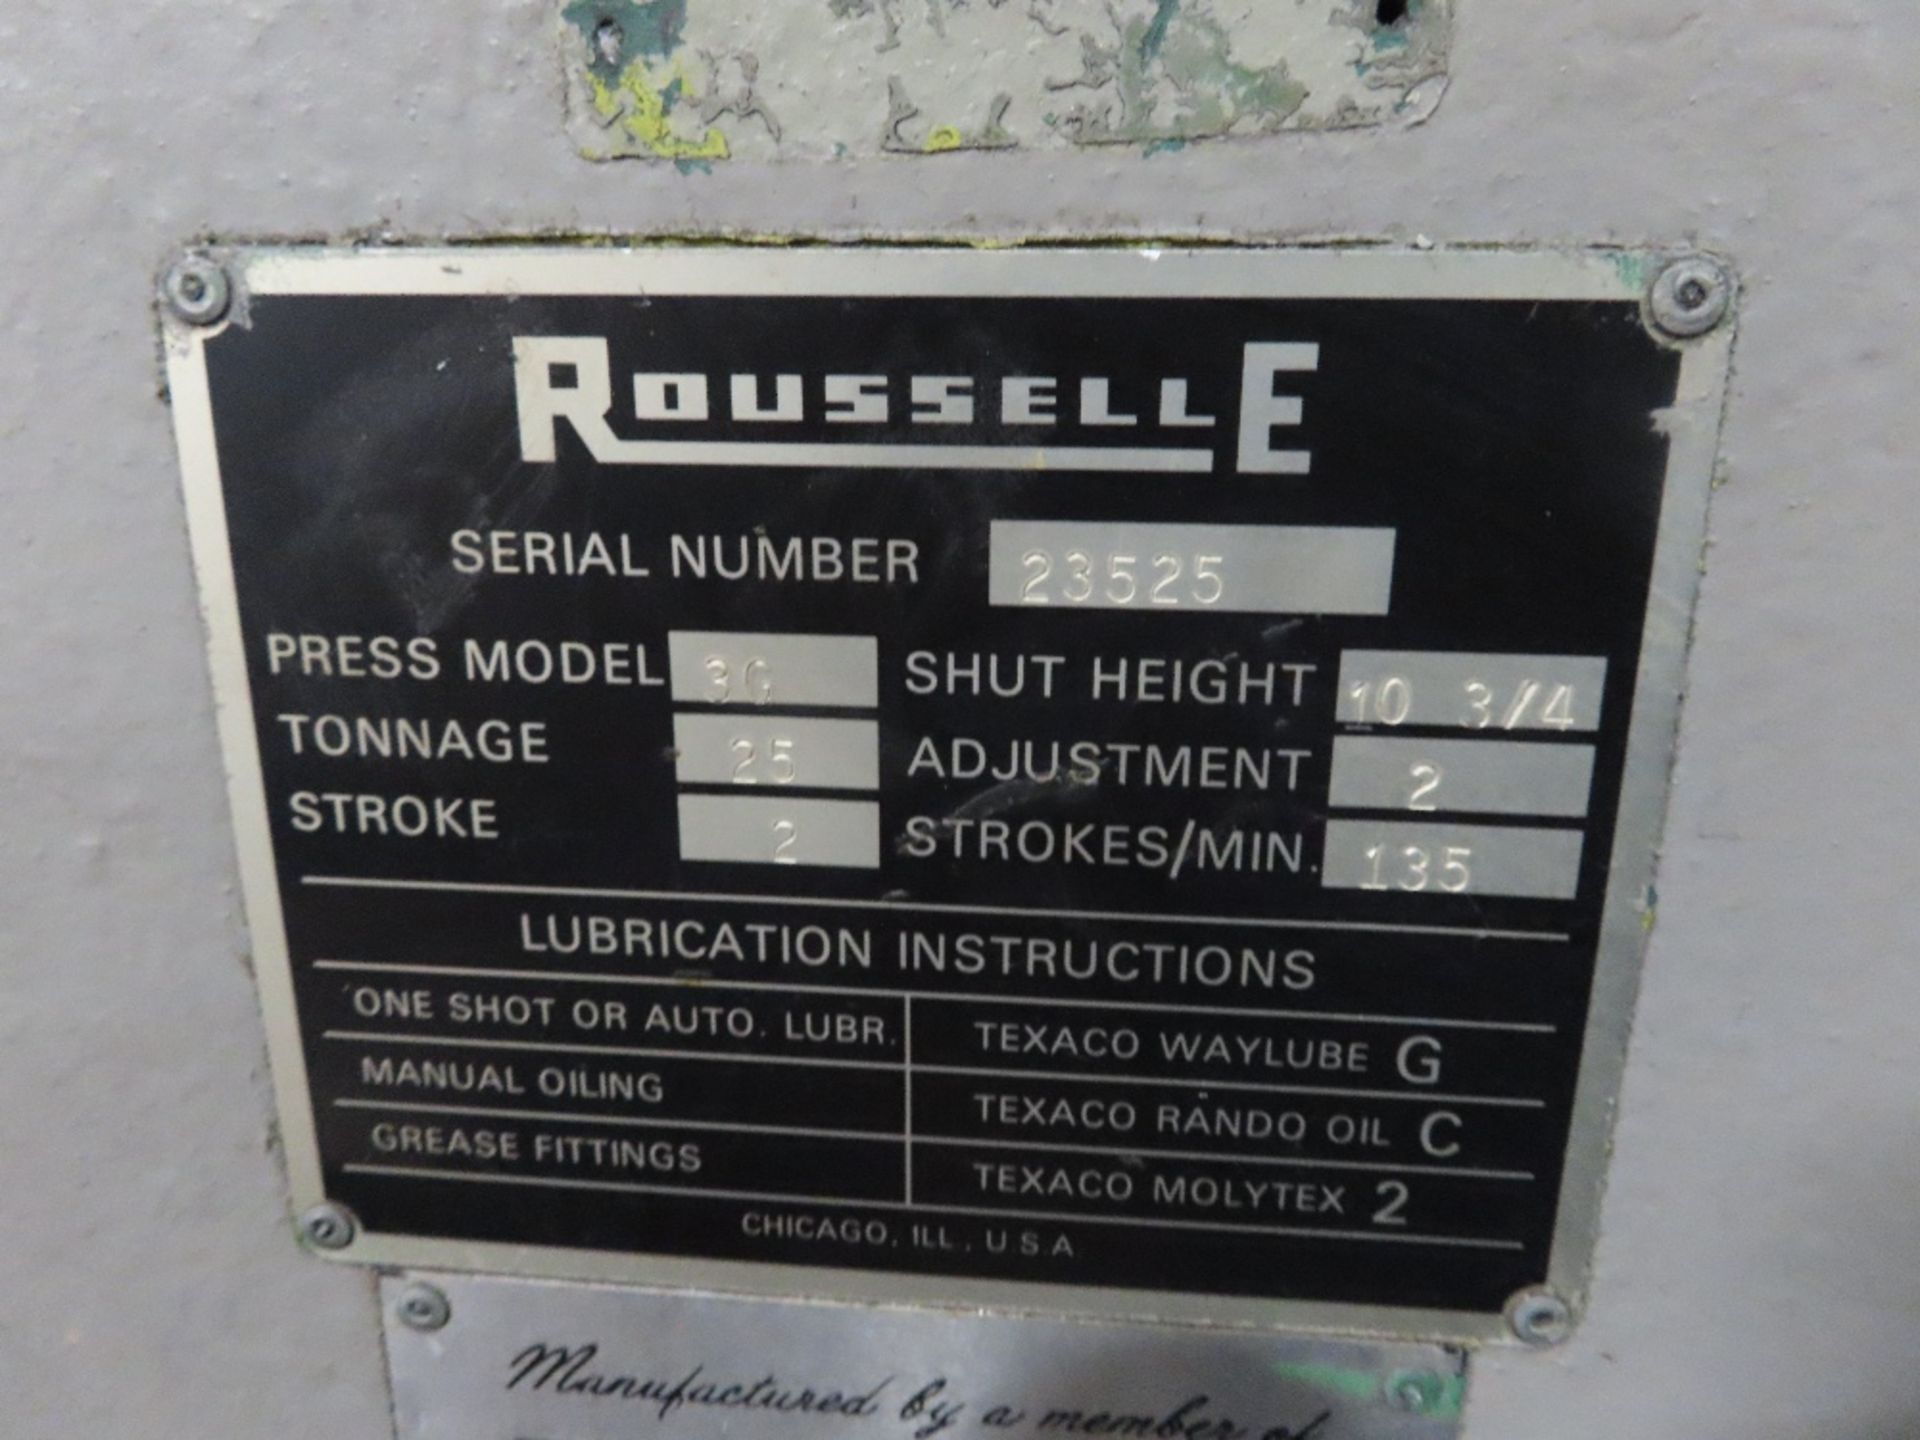 Rouselle mod. 3G, 25 Ton Punch Press, Stroke - Image 3 of 3